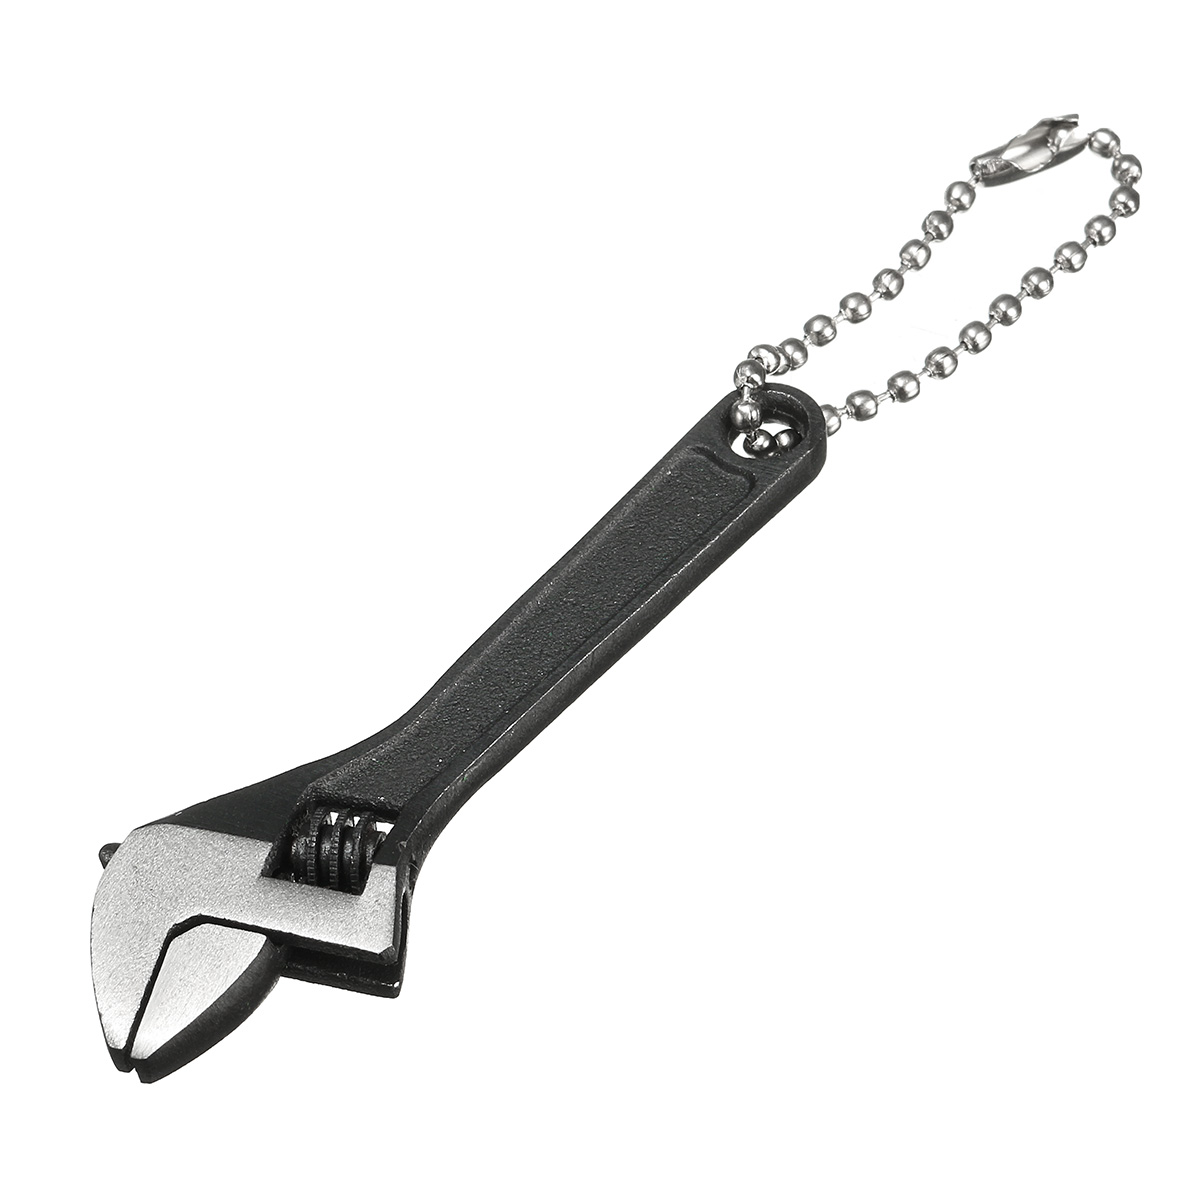 DANIU-66mm-26inch-Mini-Metal-Adjustable-Wrench-Spanner-Hand-Tool-0-10mm-Jaw-Wrench-Black-1199883-8